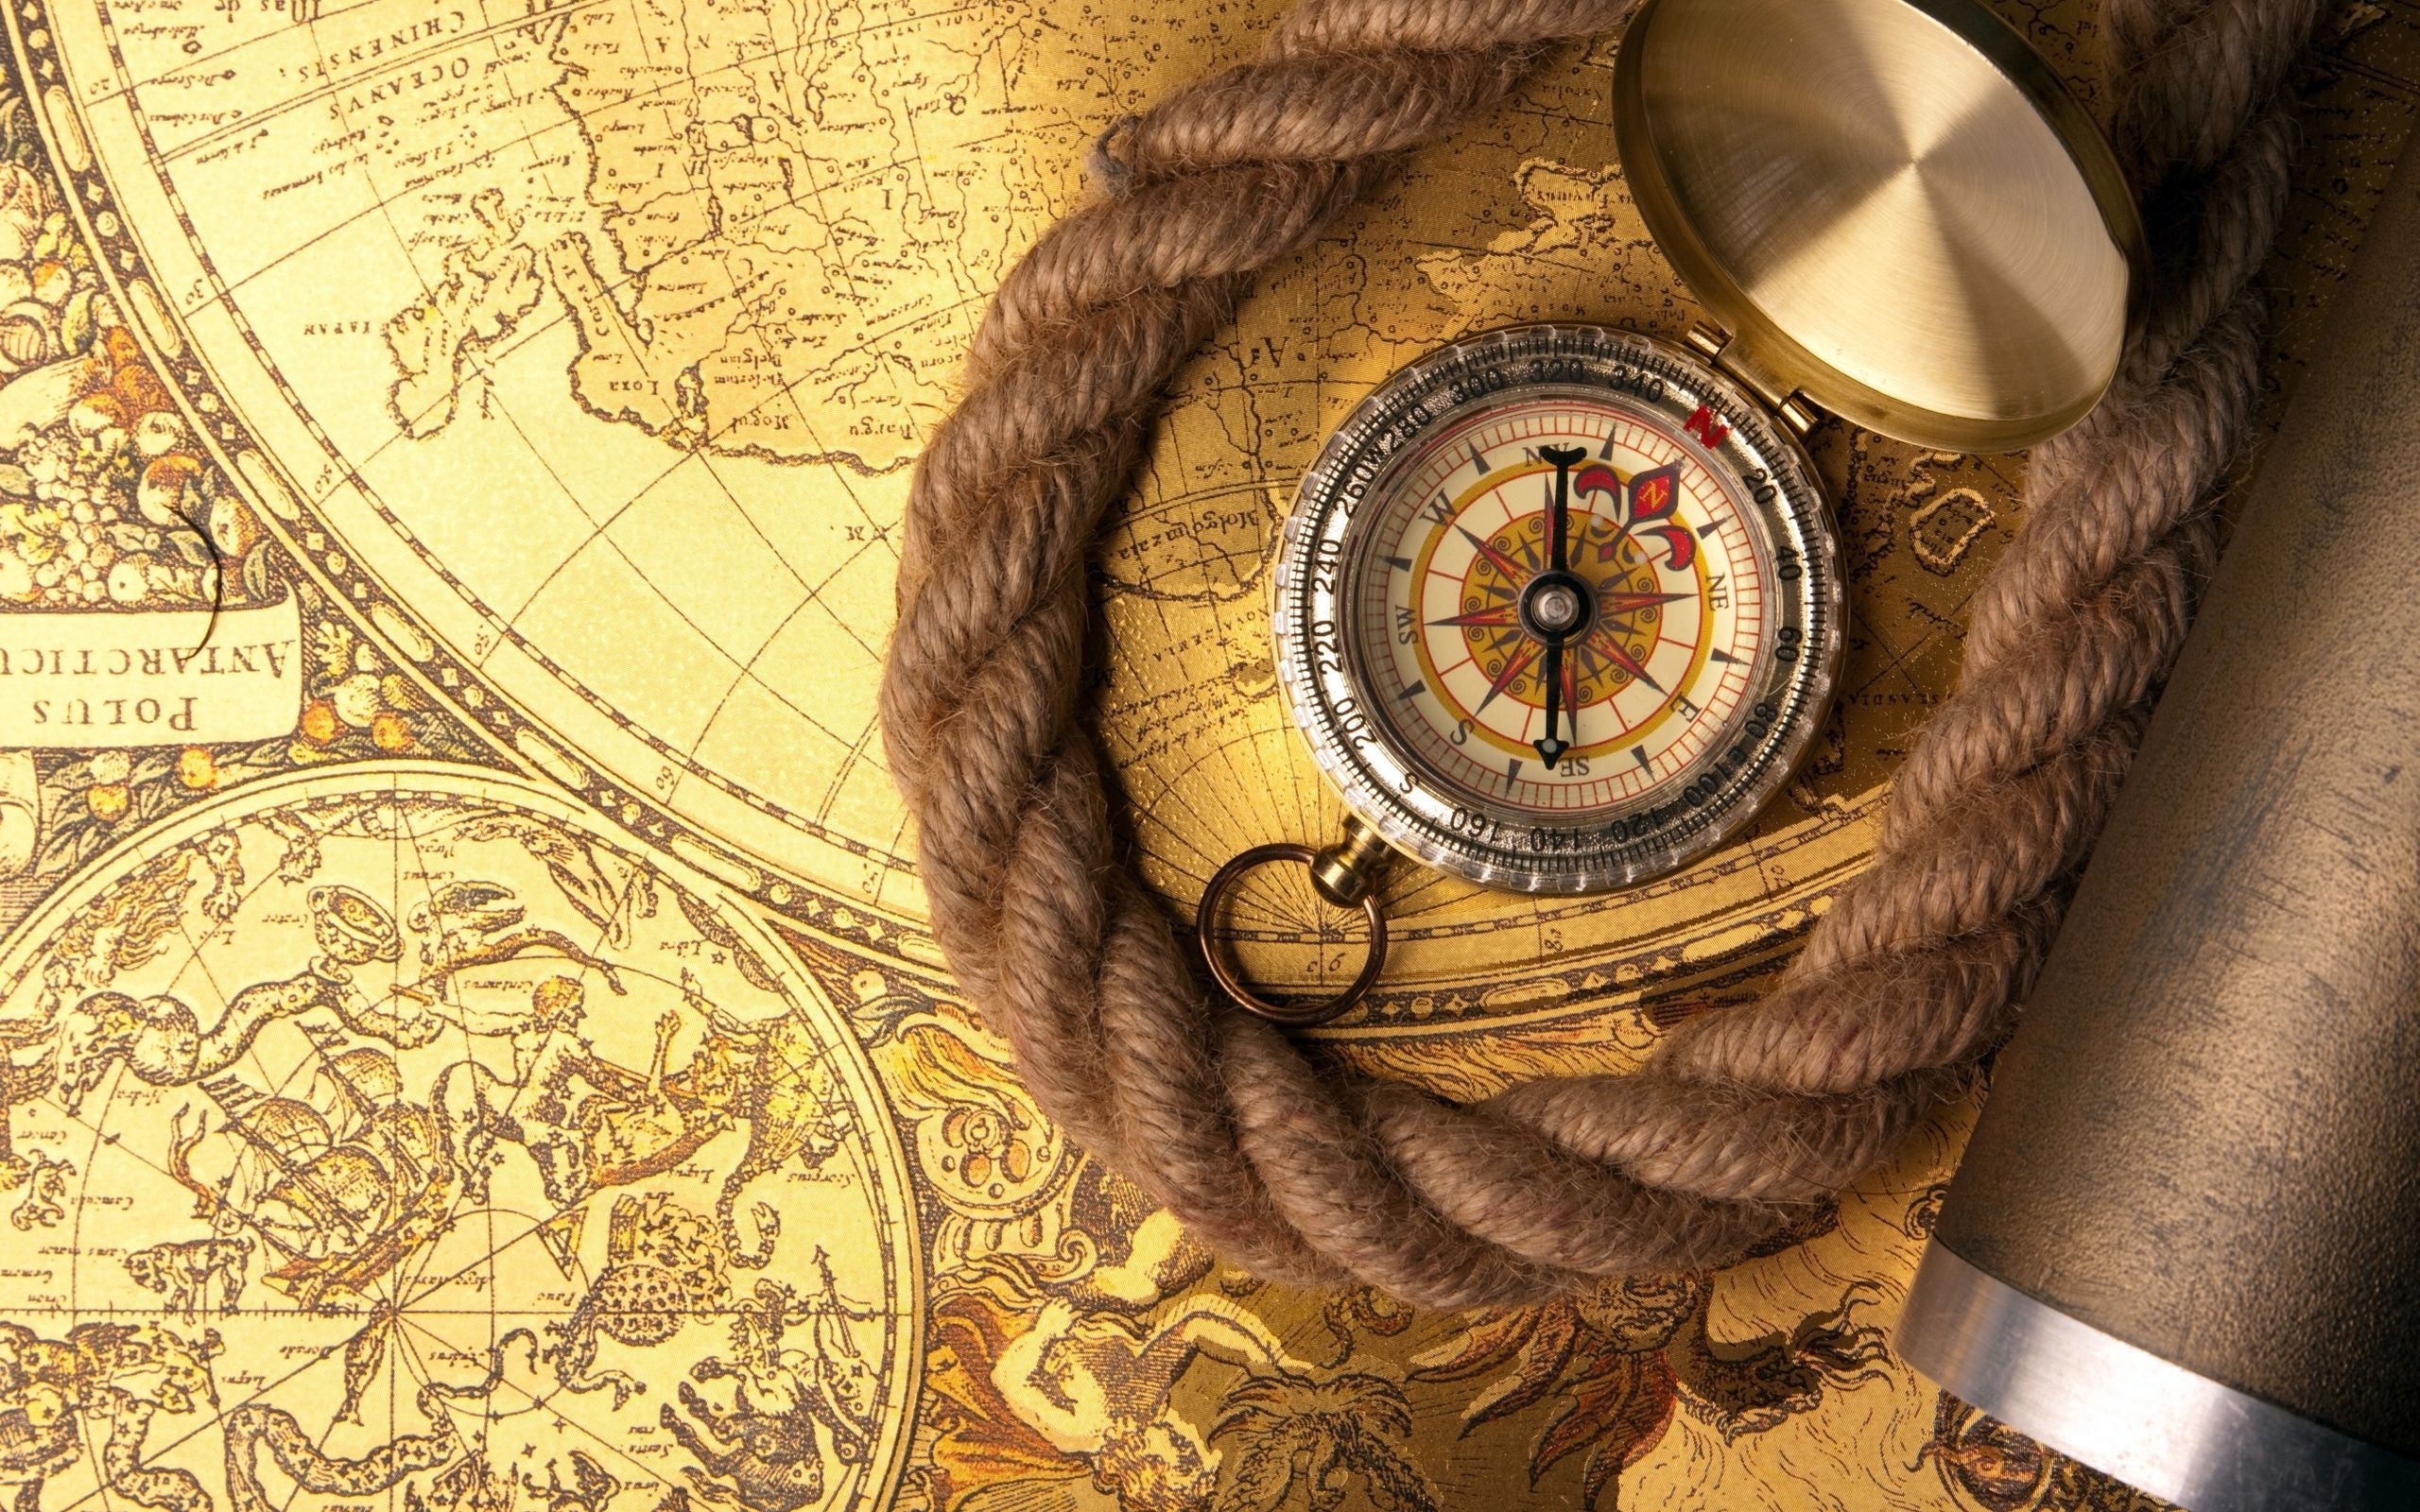 Compass and map wallpapers, Travel inspiration, Navigational theme, High-quality images, 2560x1600 HD Desktop